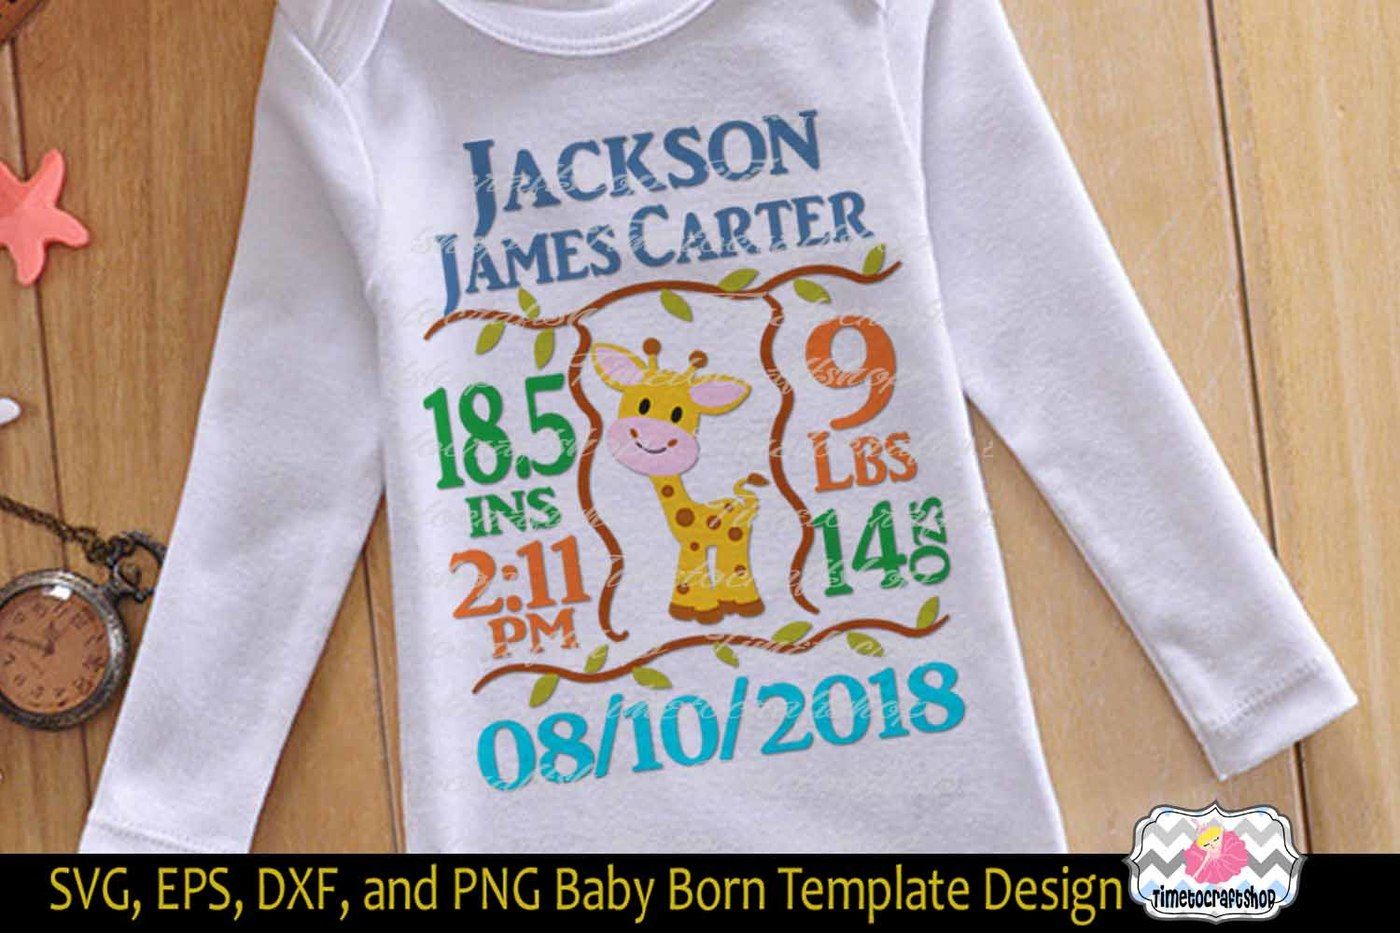 Download SVG, Dxf, Png & Eps Cutting Files Baby Birth Announcement ...